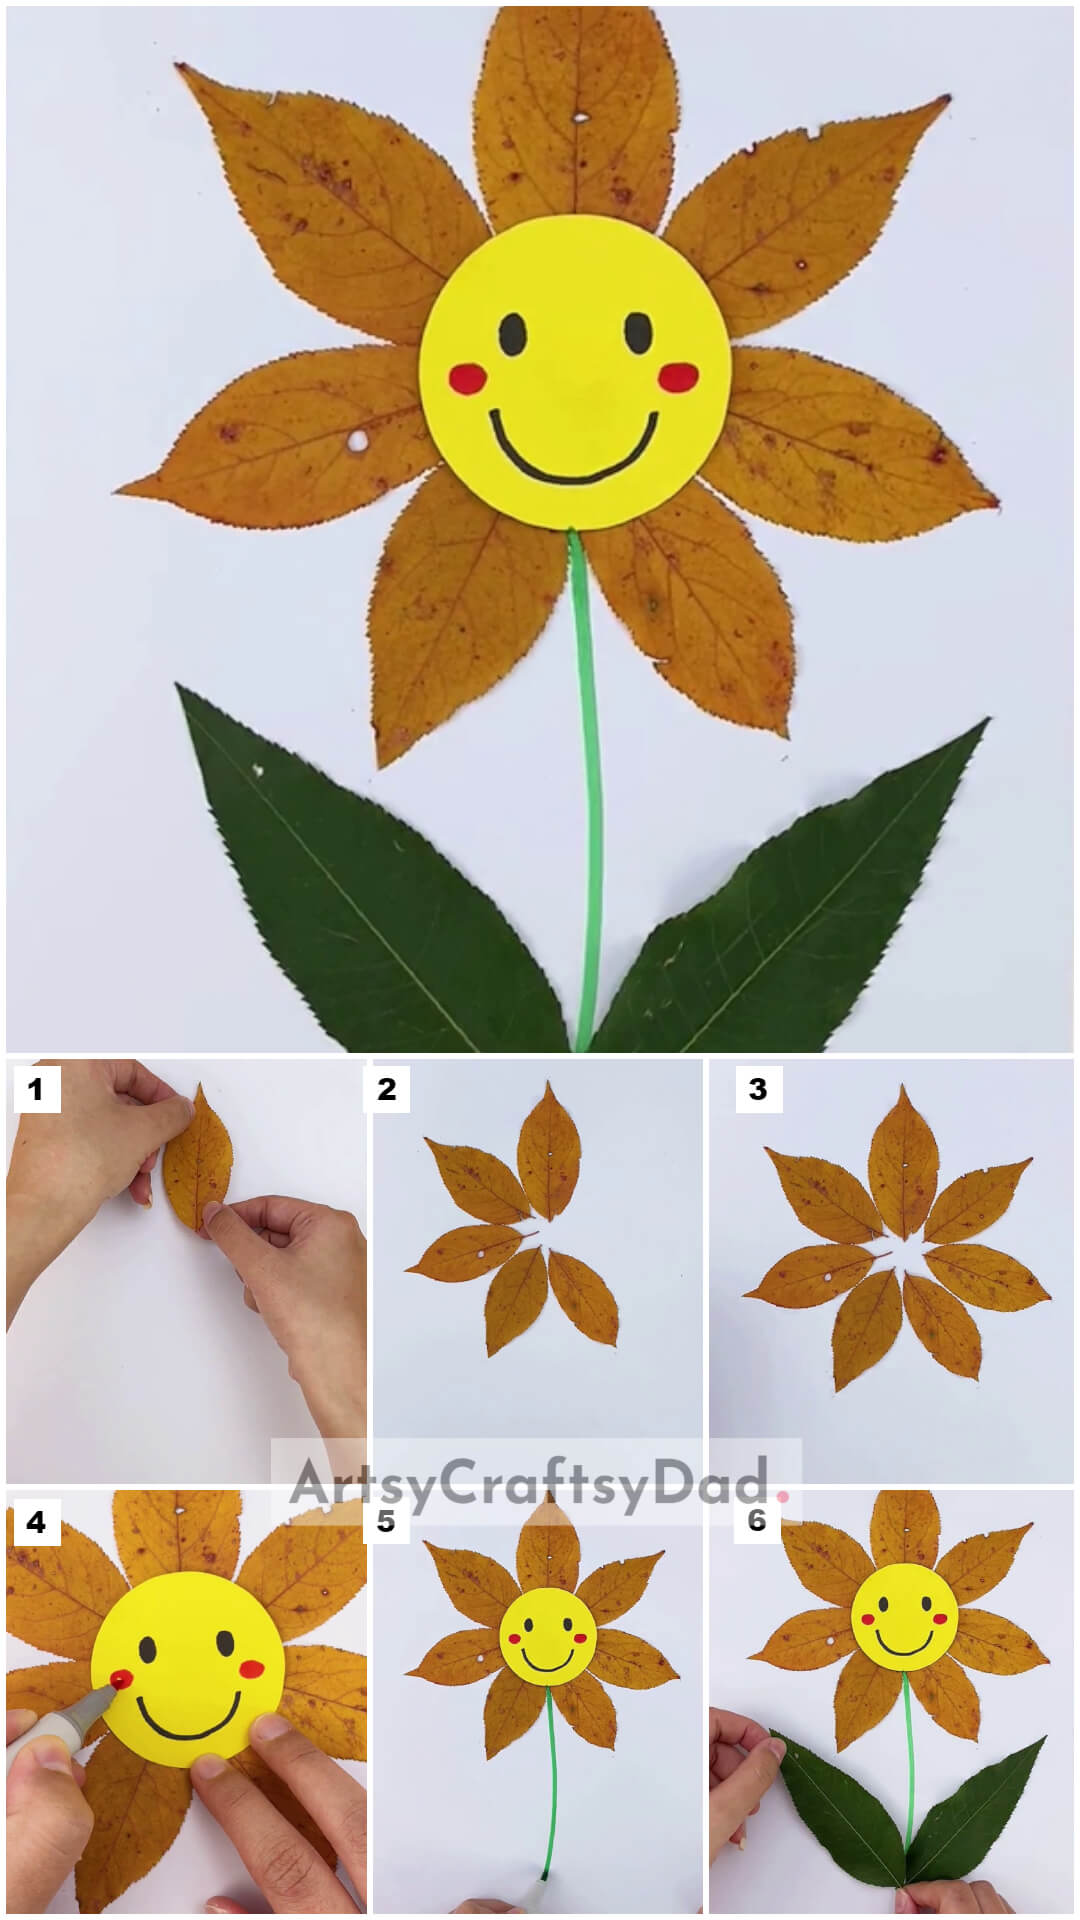 Simple To Make Leaf Sunflower Craft Tutorial For Kids